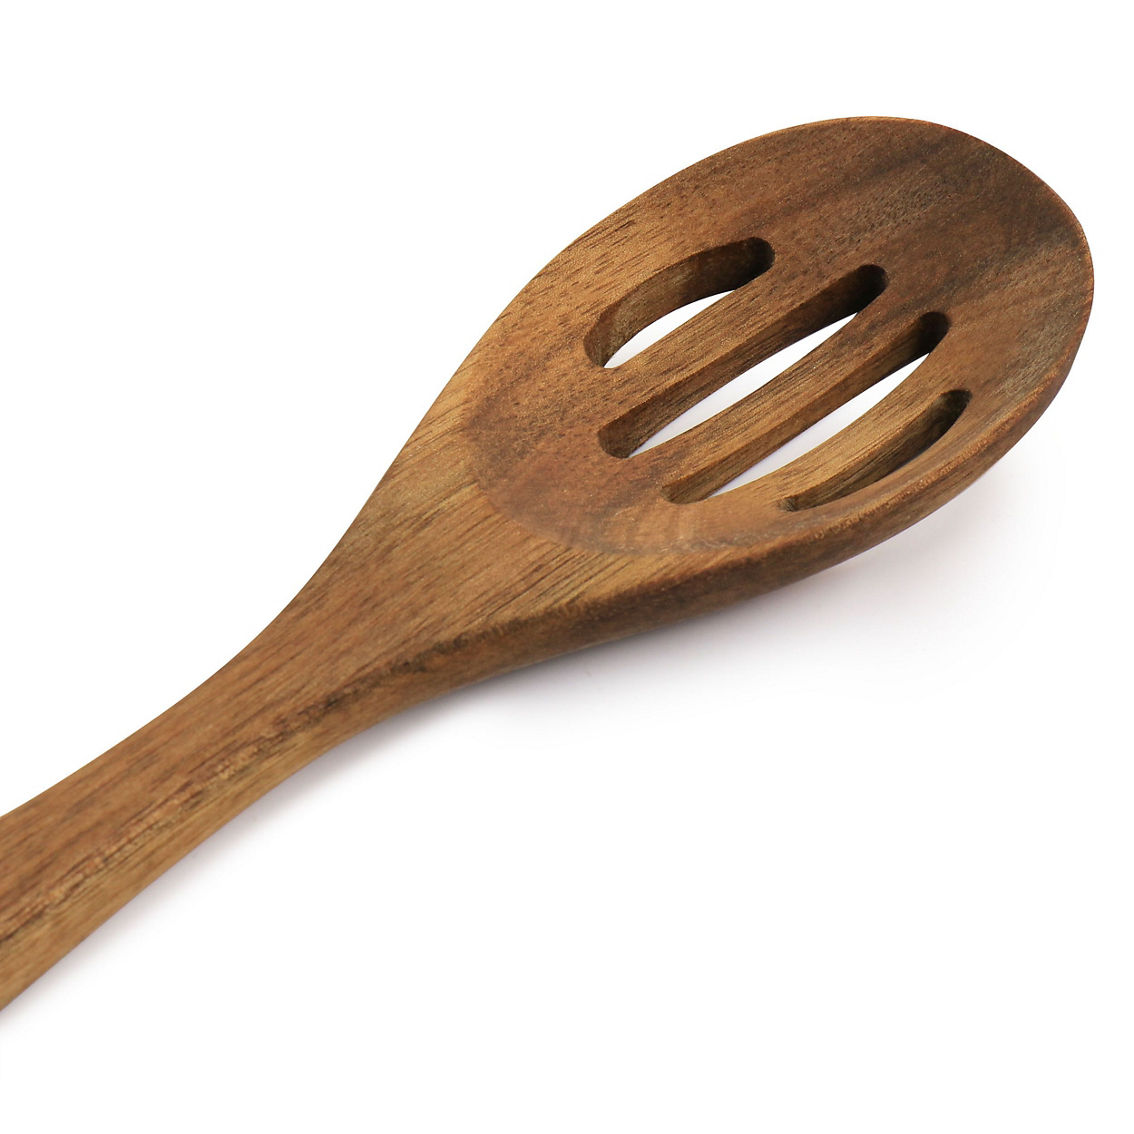 Oster Acacia Wood Slotted Spoon Cooking Utensil - Image 4 of 5